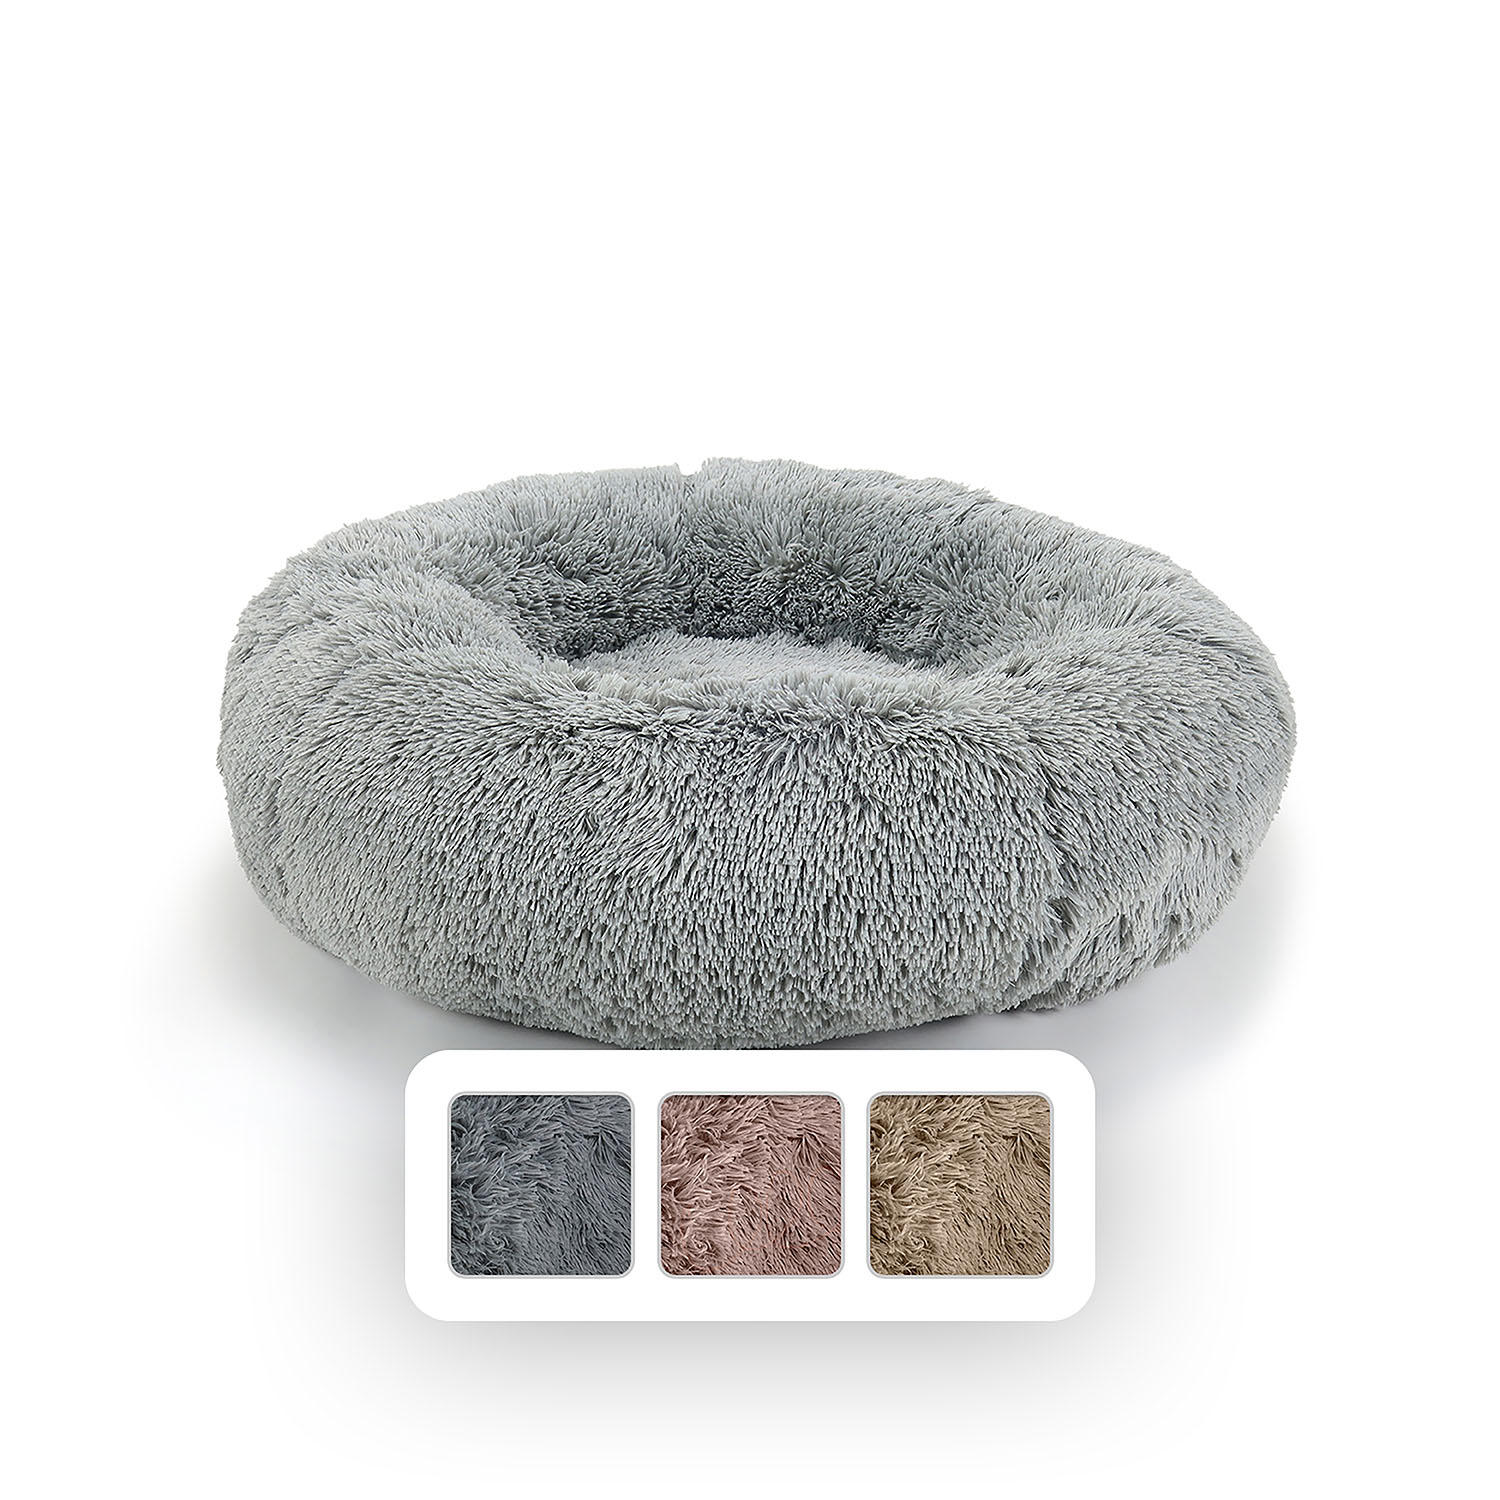 Canine Creations Donut Round Pet Bed, 39' x 39' - Charcoal Gray